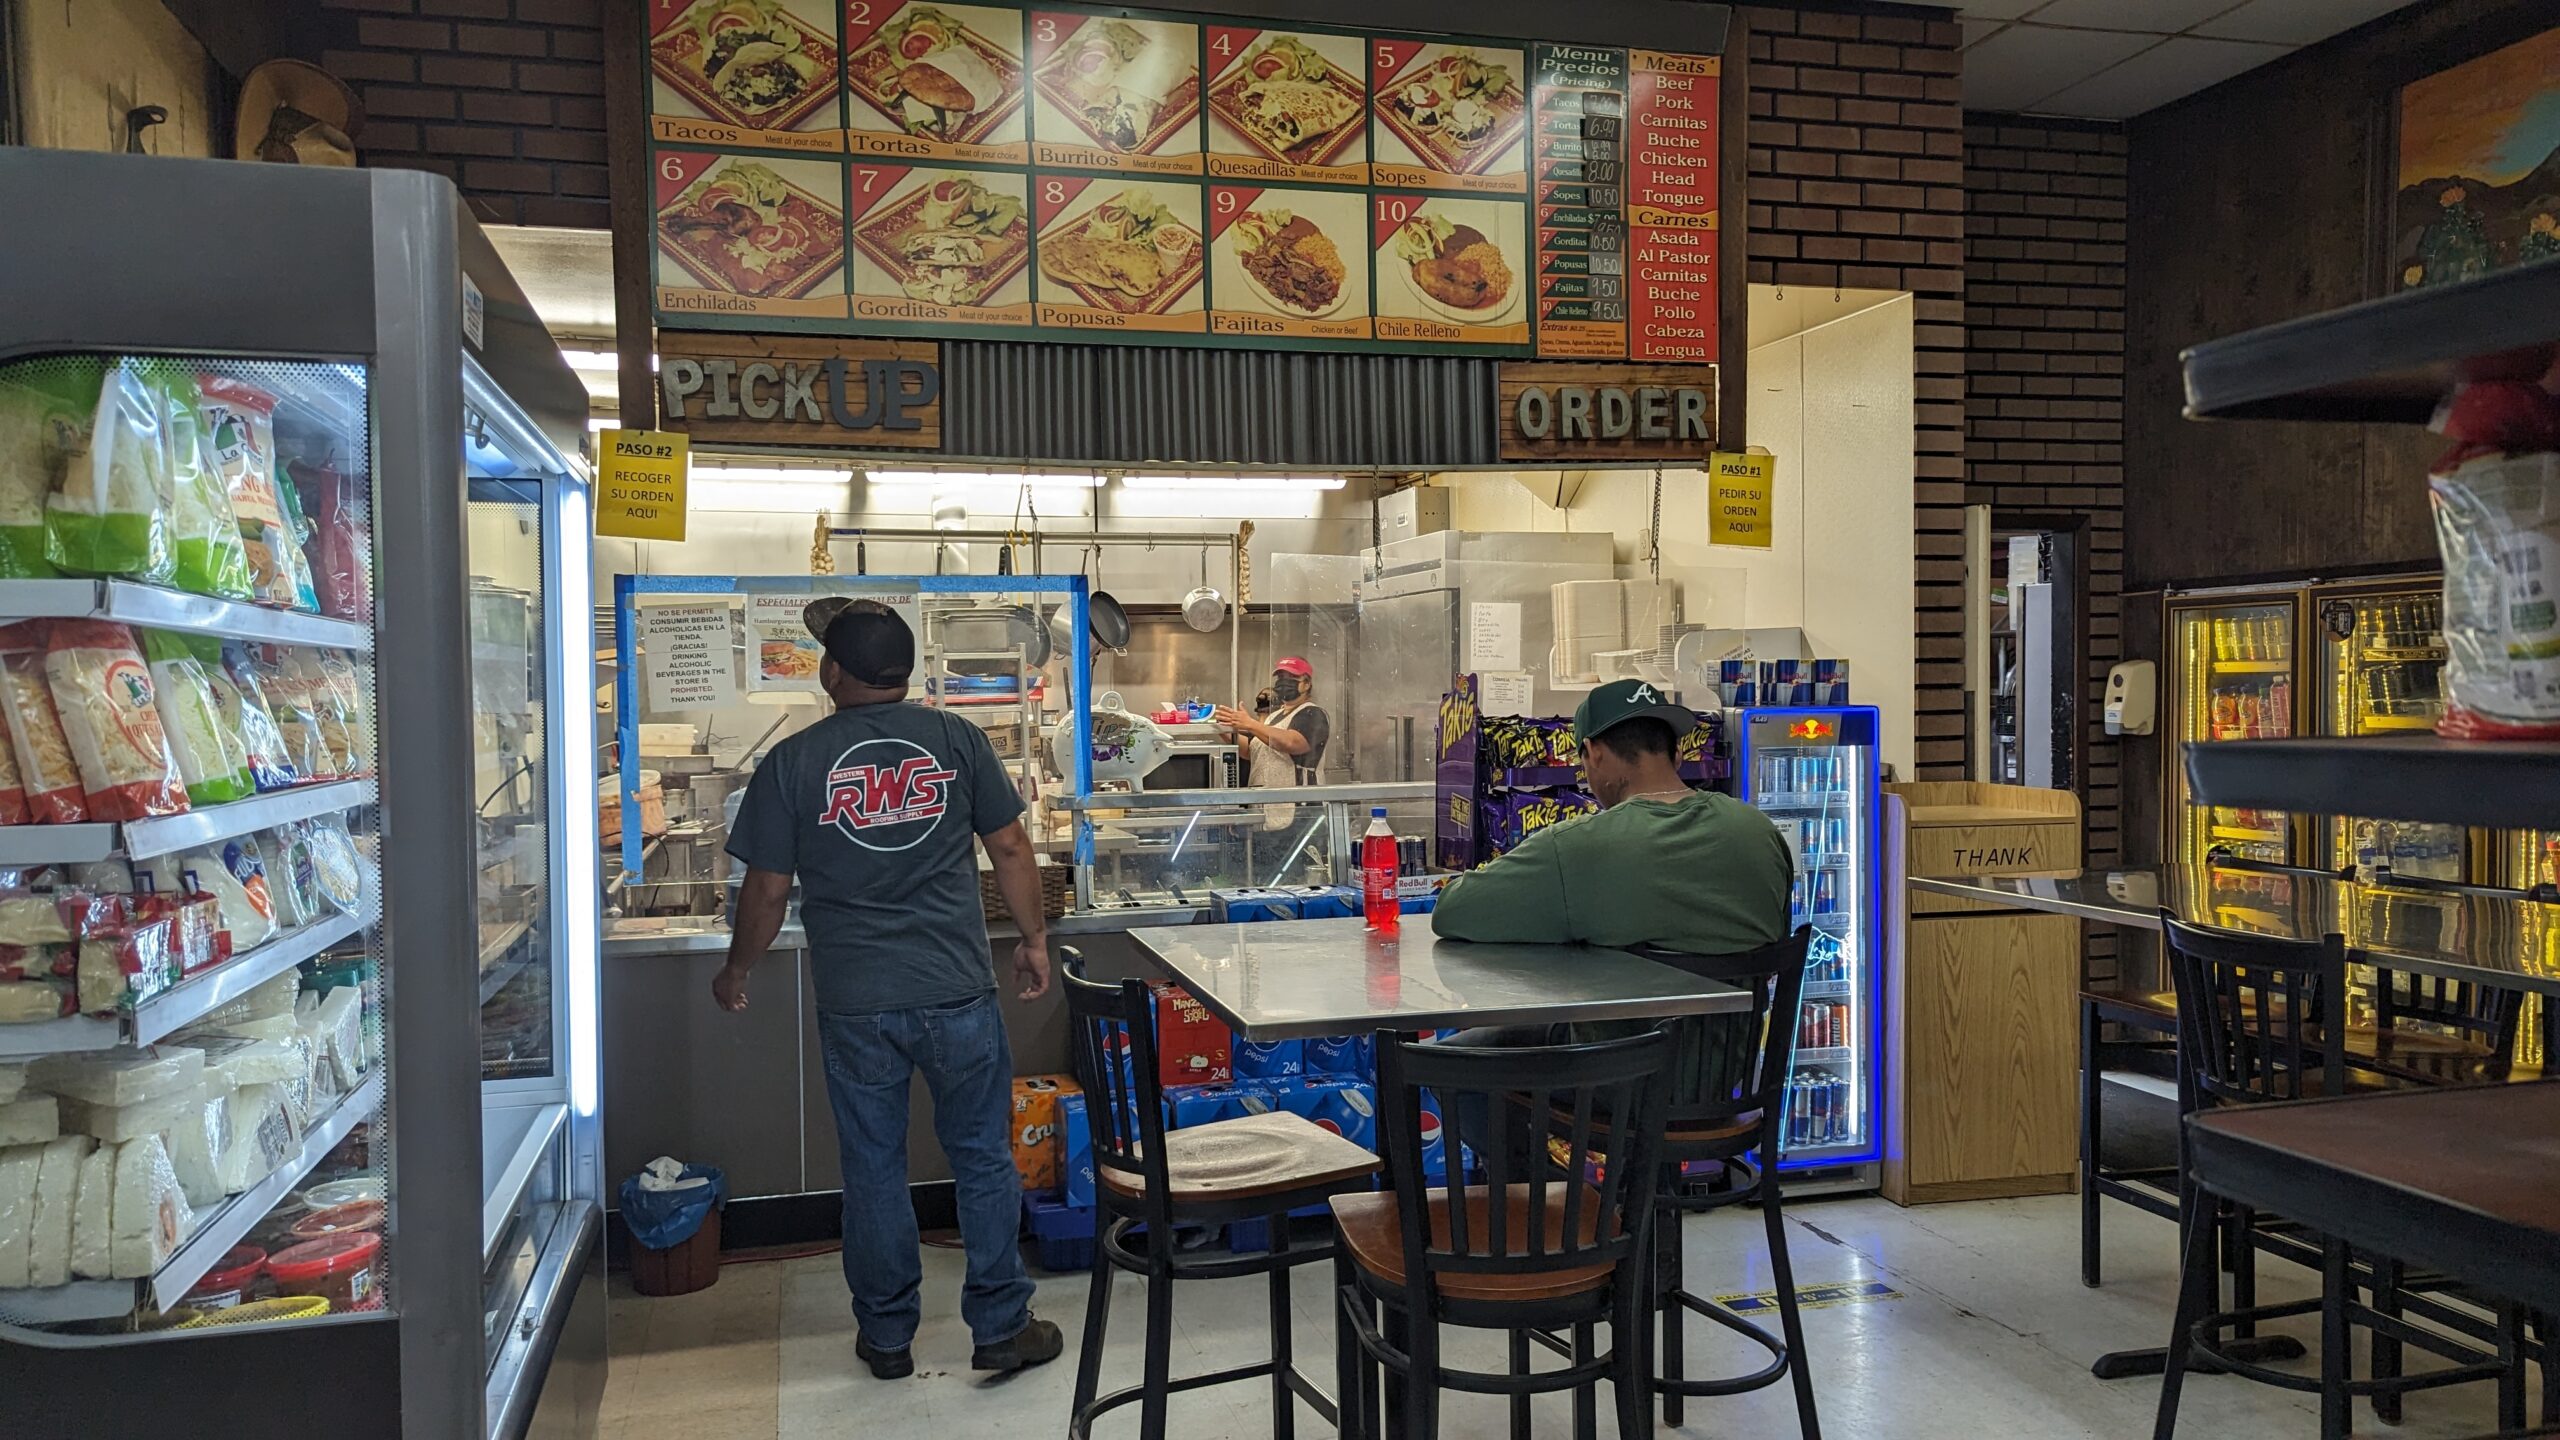 A man stands at the counter of the deli inside Pajaro Food Center, and another man sits at a table.